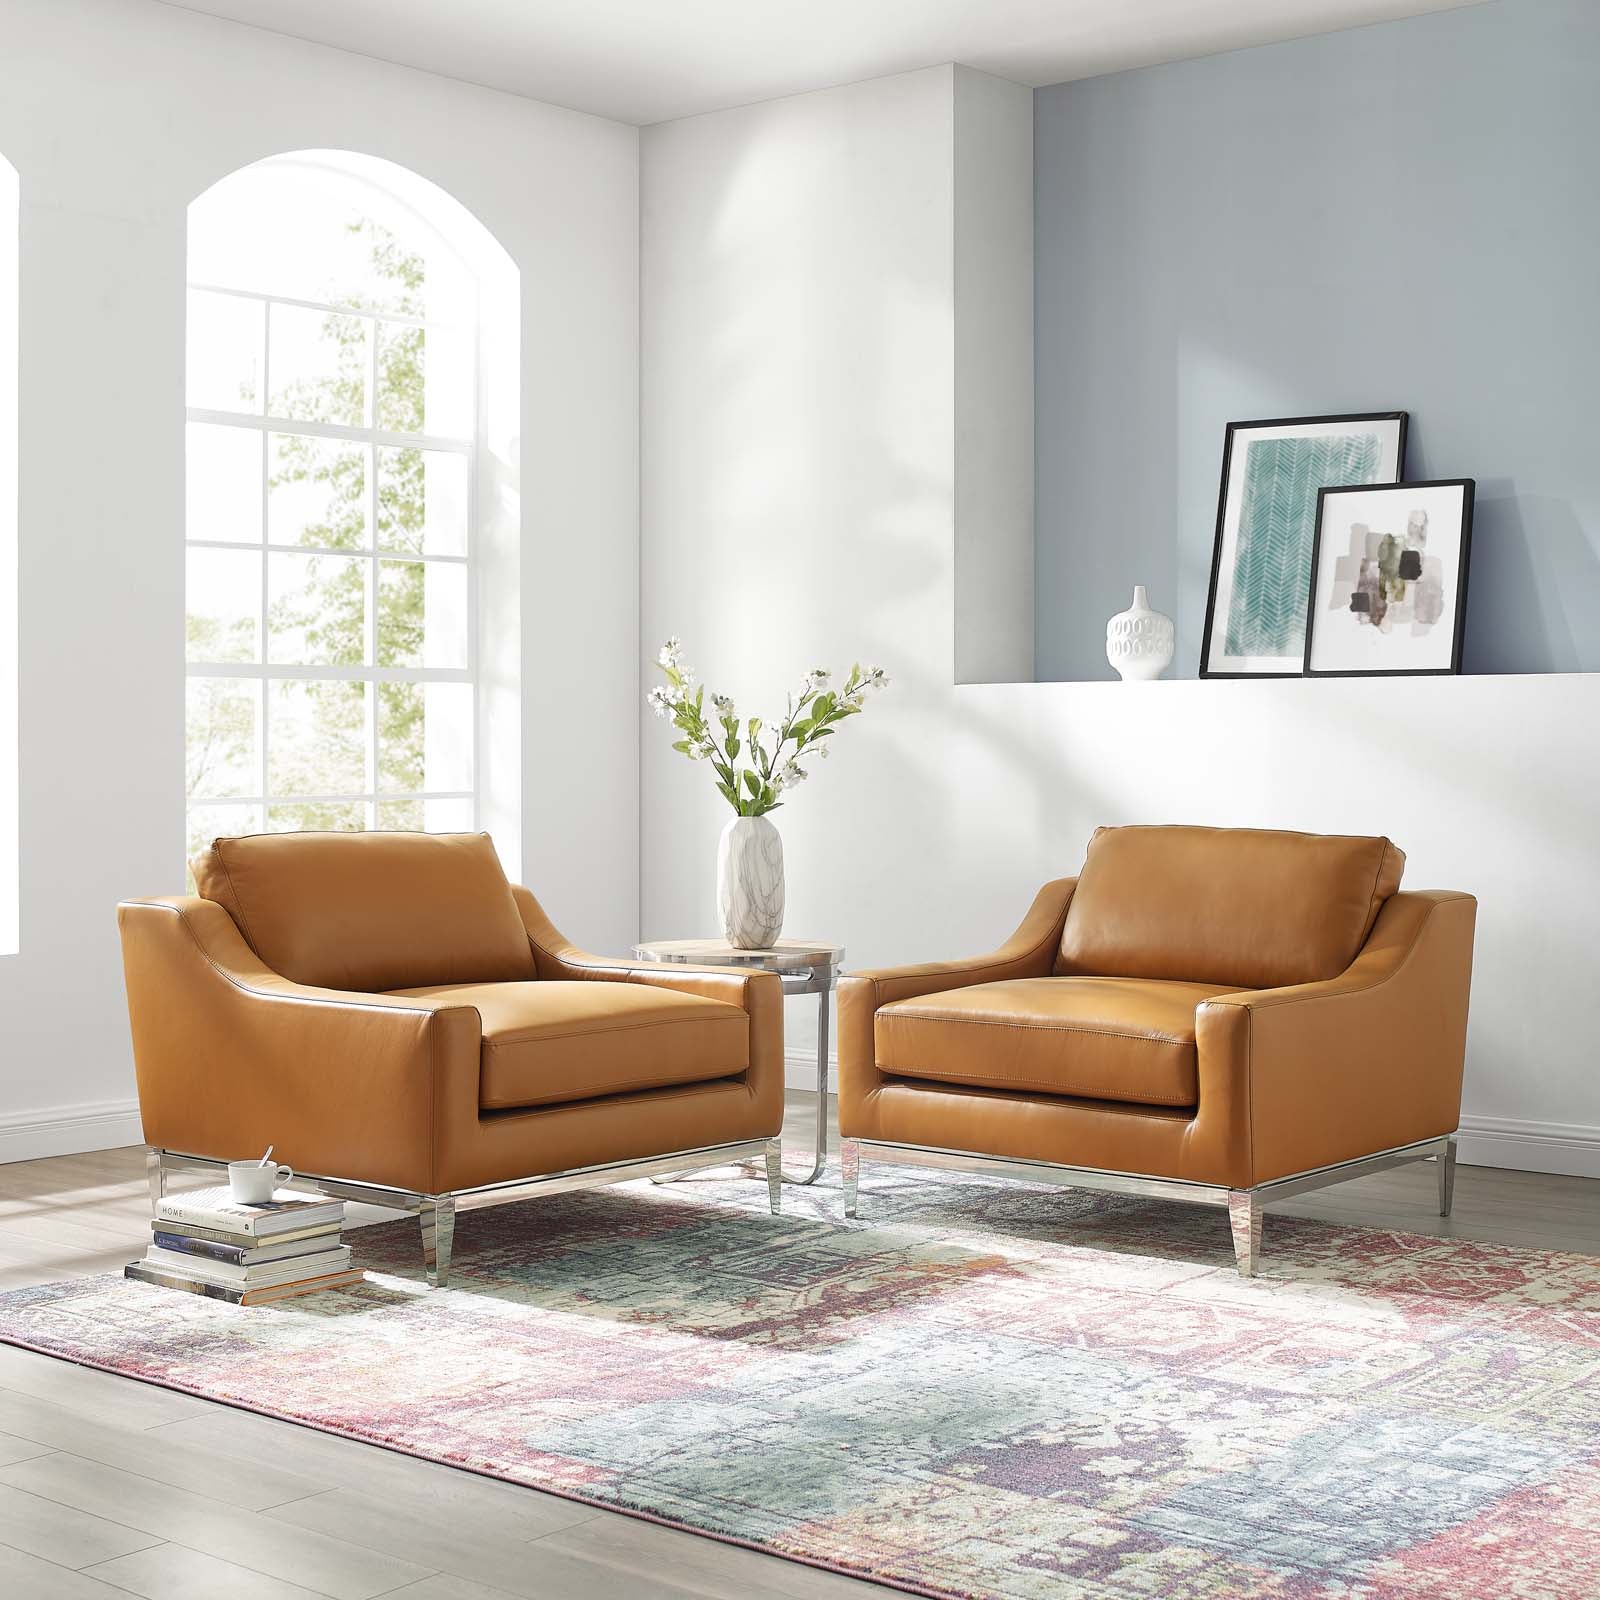 Modway Living Room Sets - Harness-Stainless-Steel-Base-Leather-Armchair-Set-of-2-Tan